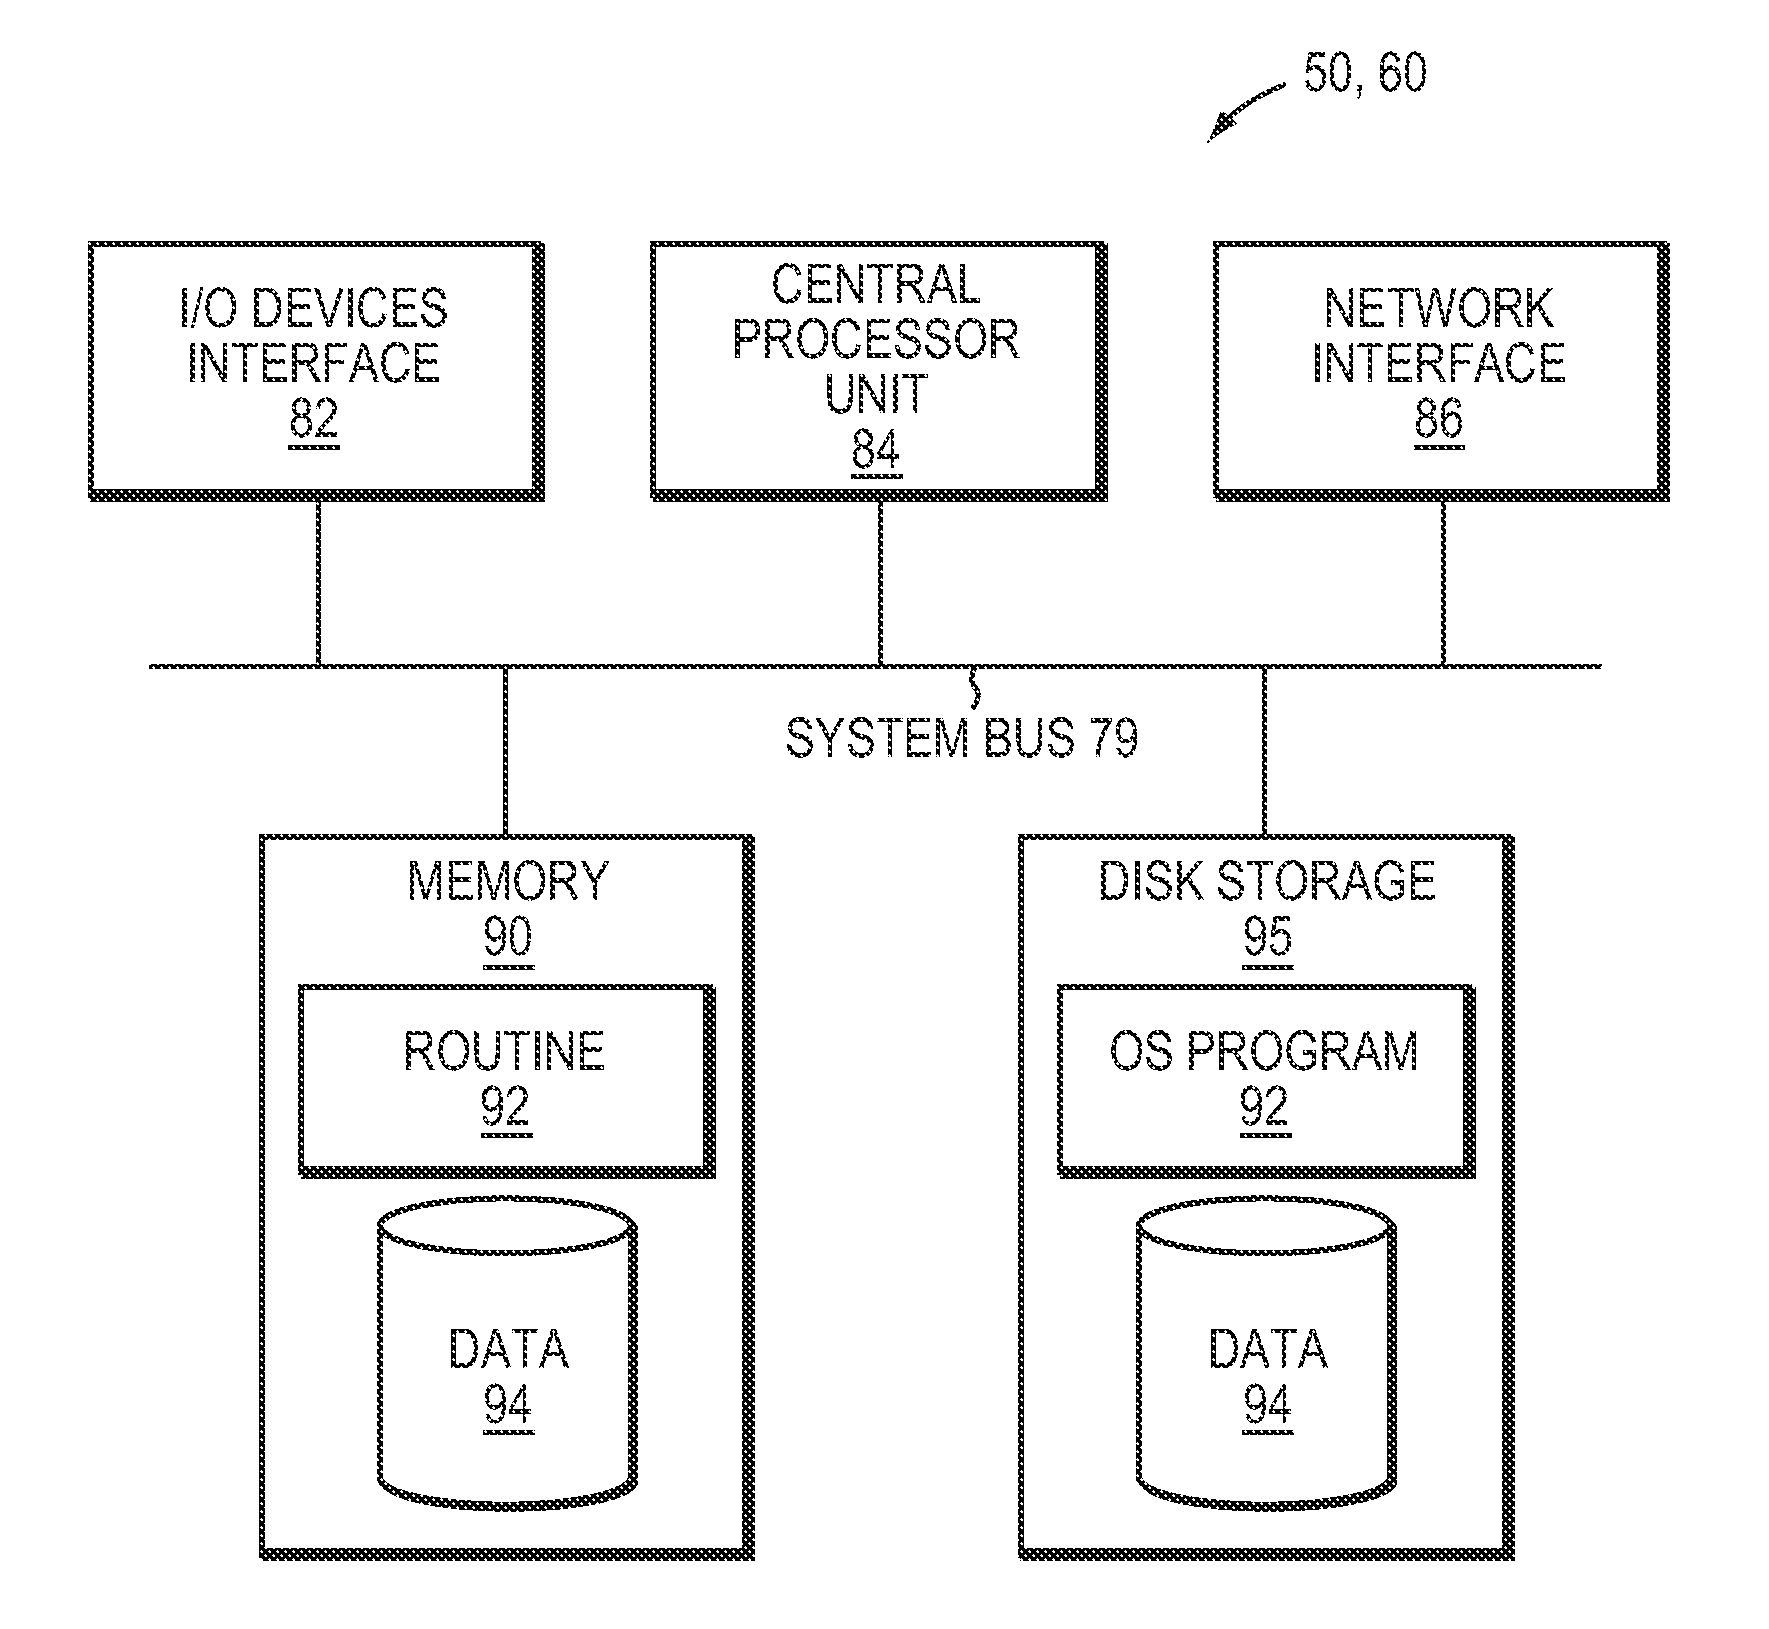 Method for coordinating updates to database and in-memory cache